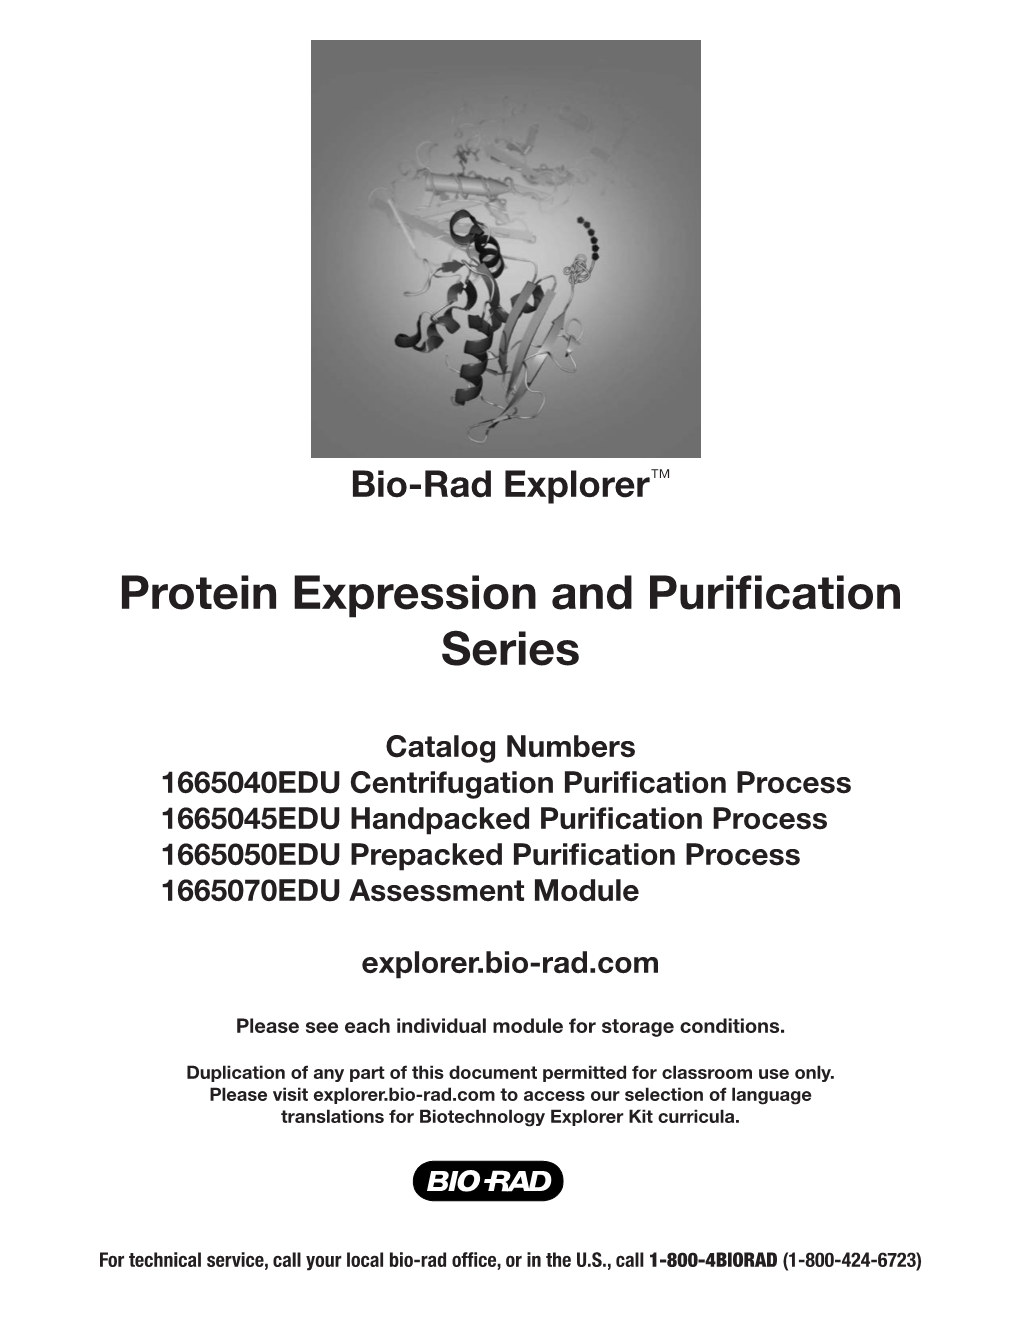 Protein Expression and Purification Series